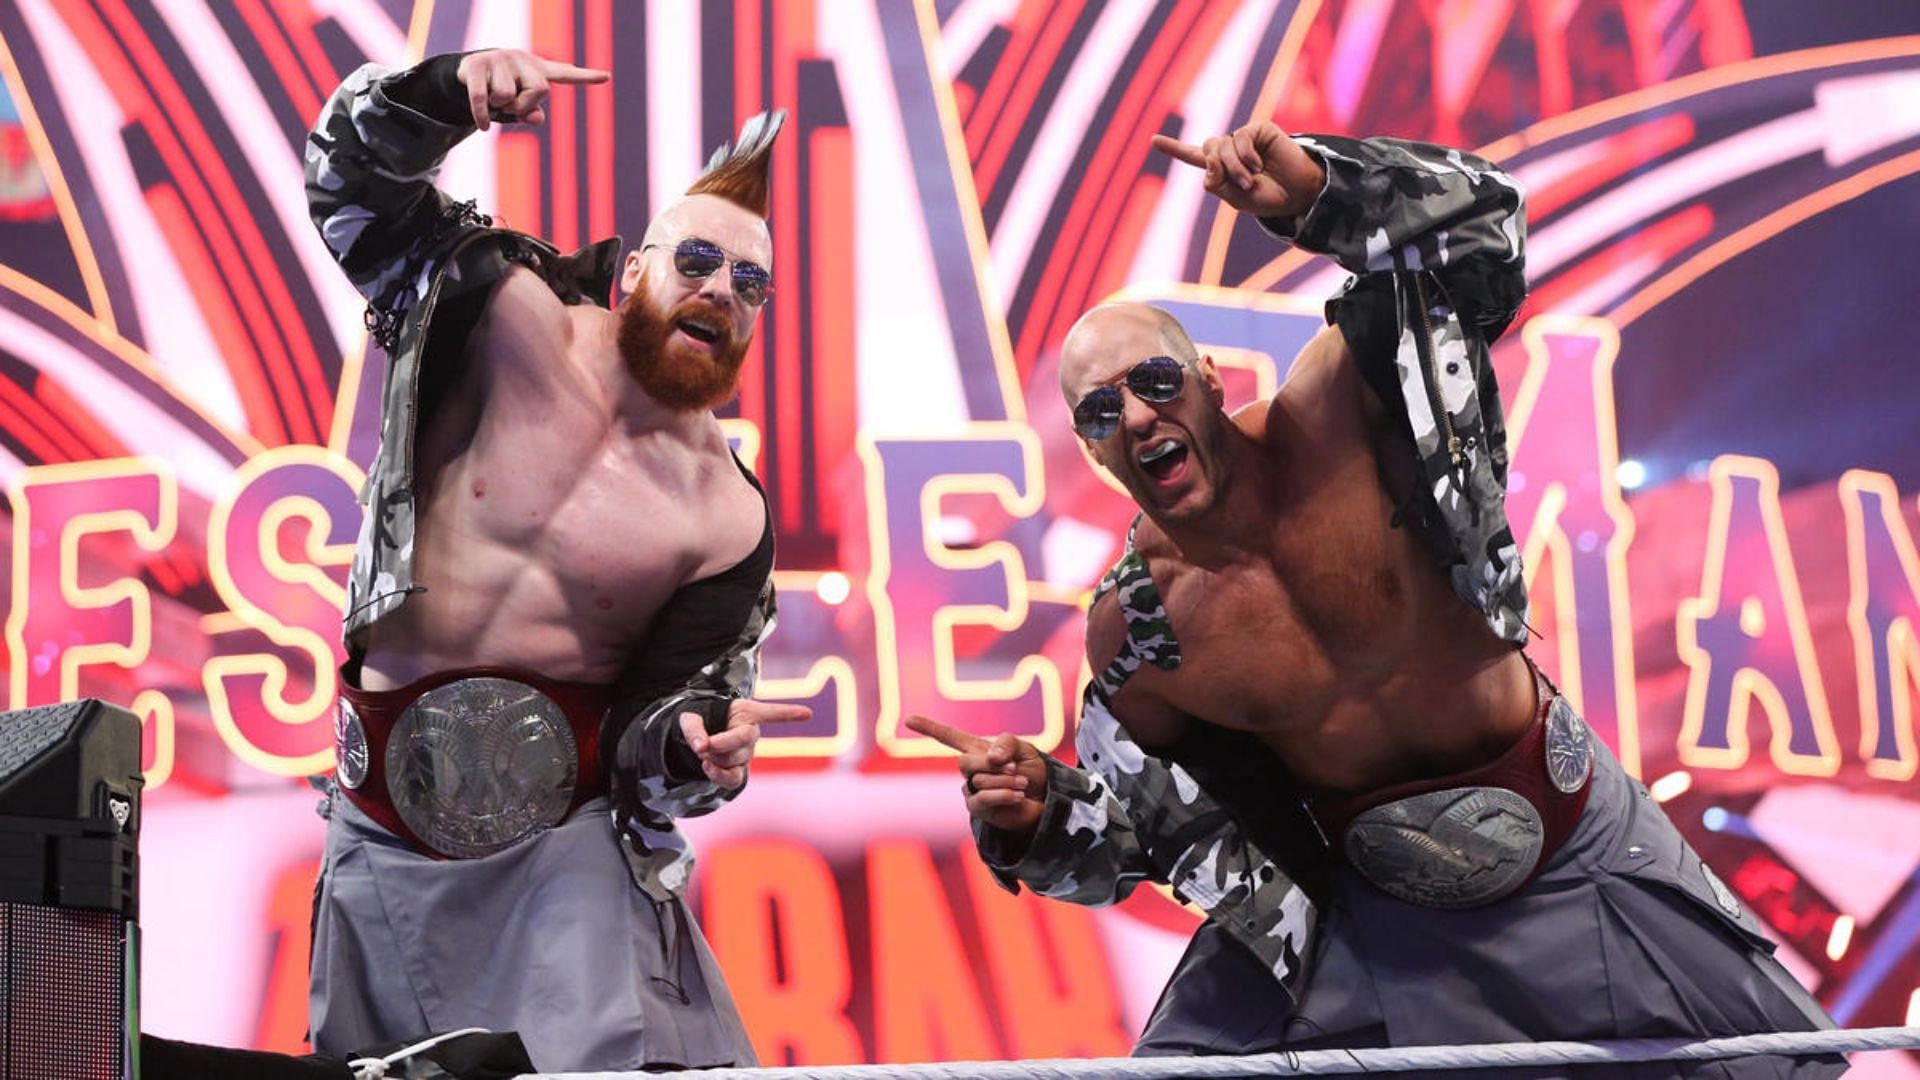 Sheamus and Cesaro moments before their embarrassing loss